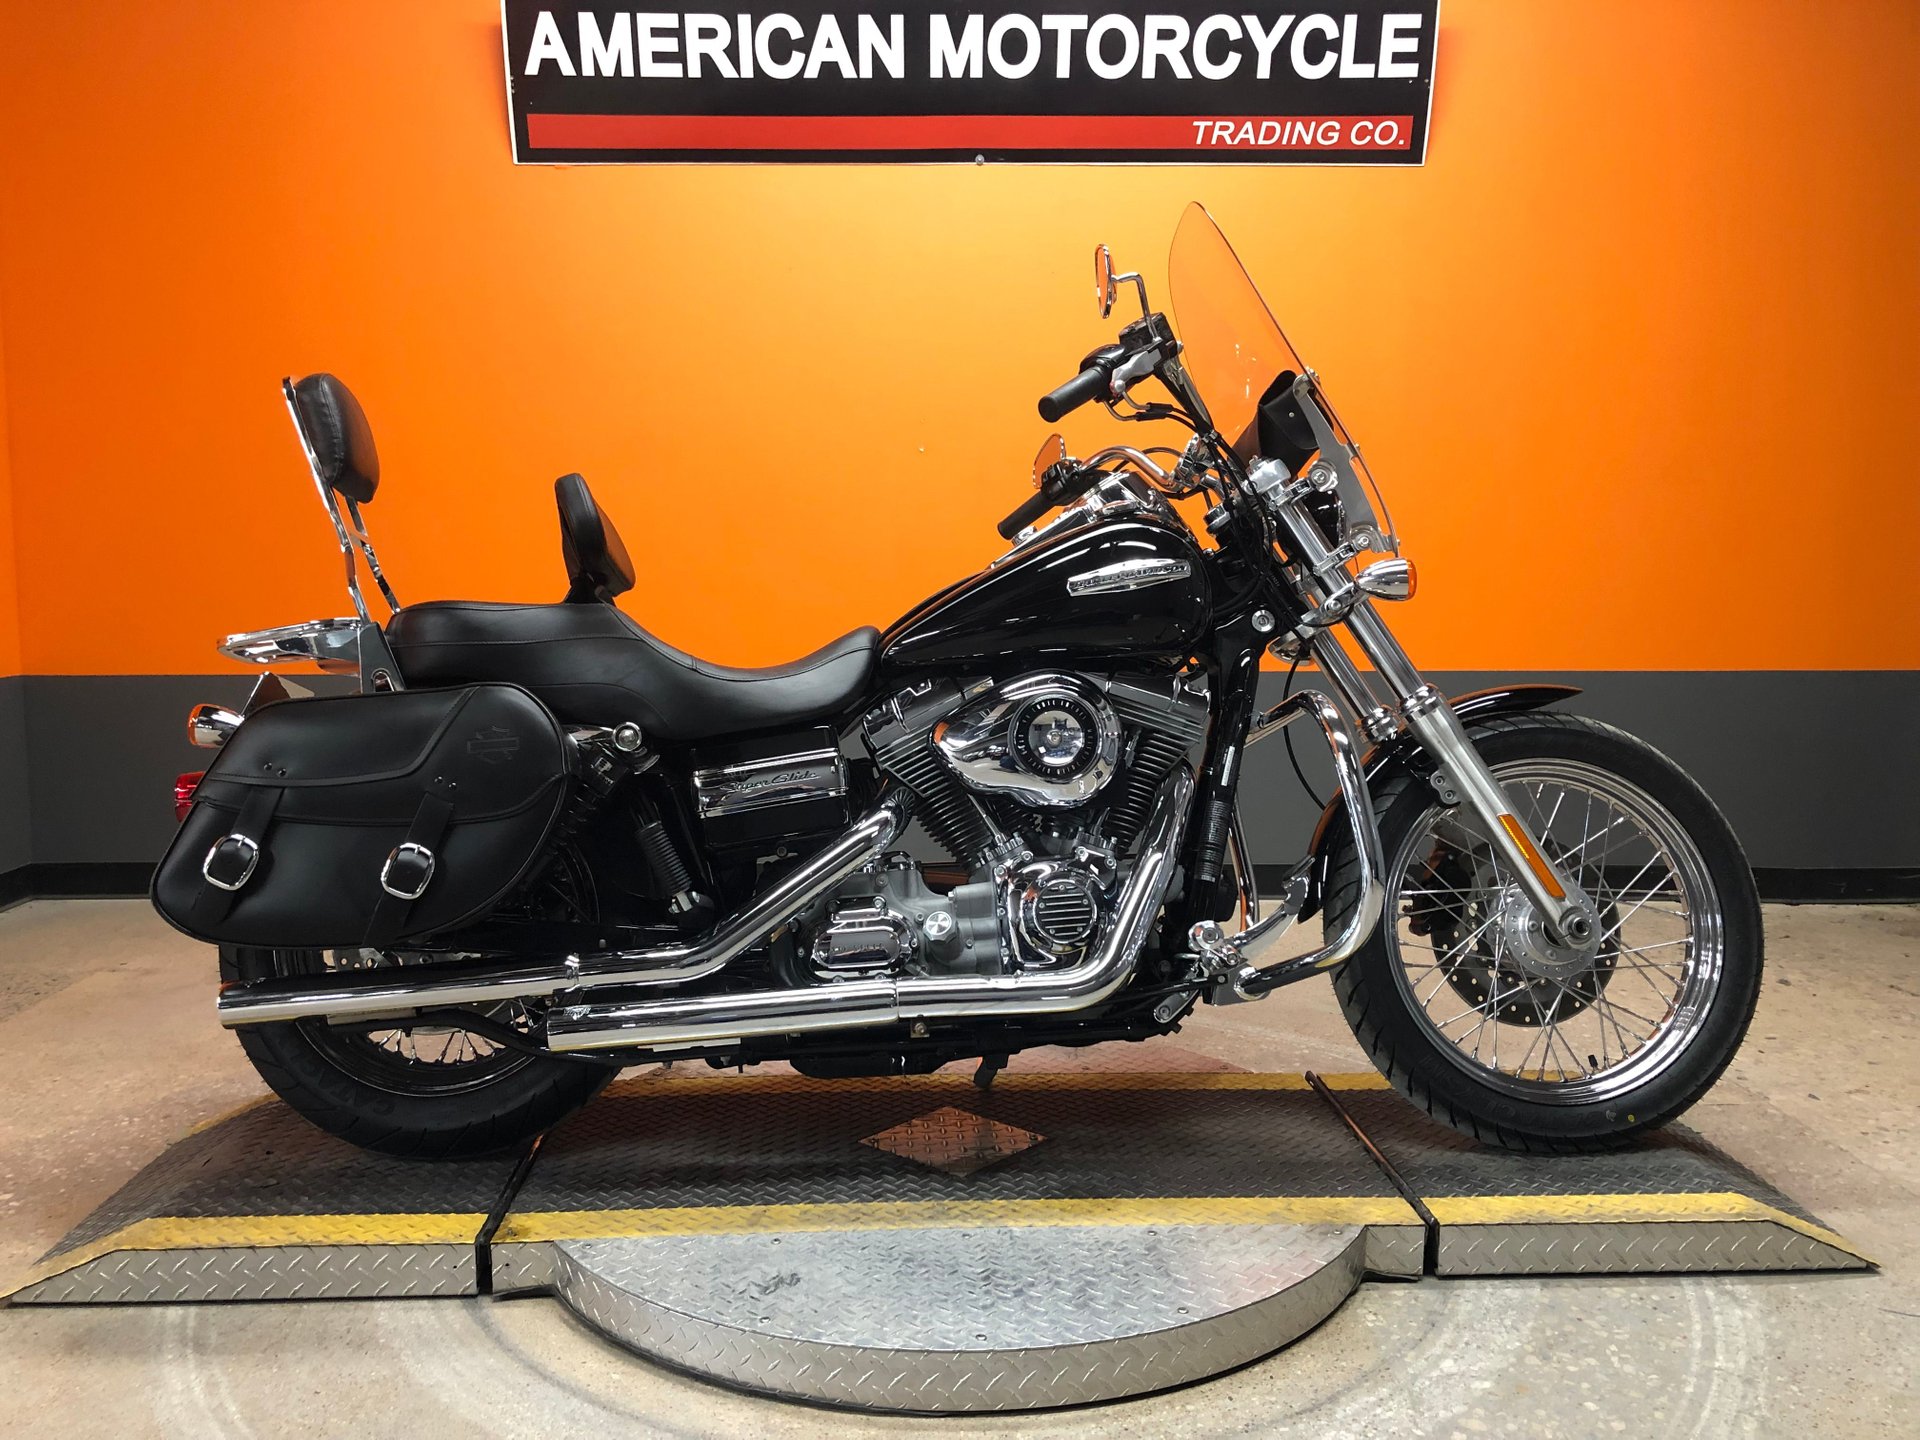 2008 Harley Davidson Dyna Super Glide American Motorcycle Trading Company Used Harley Davidson Motorcycles